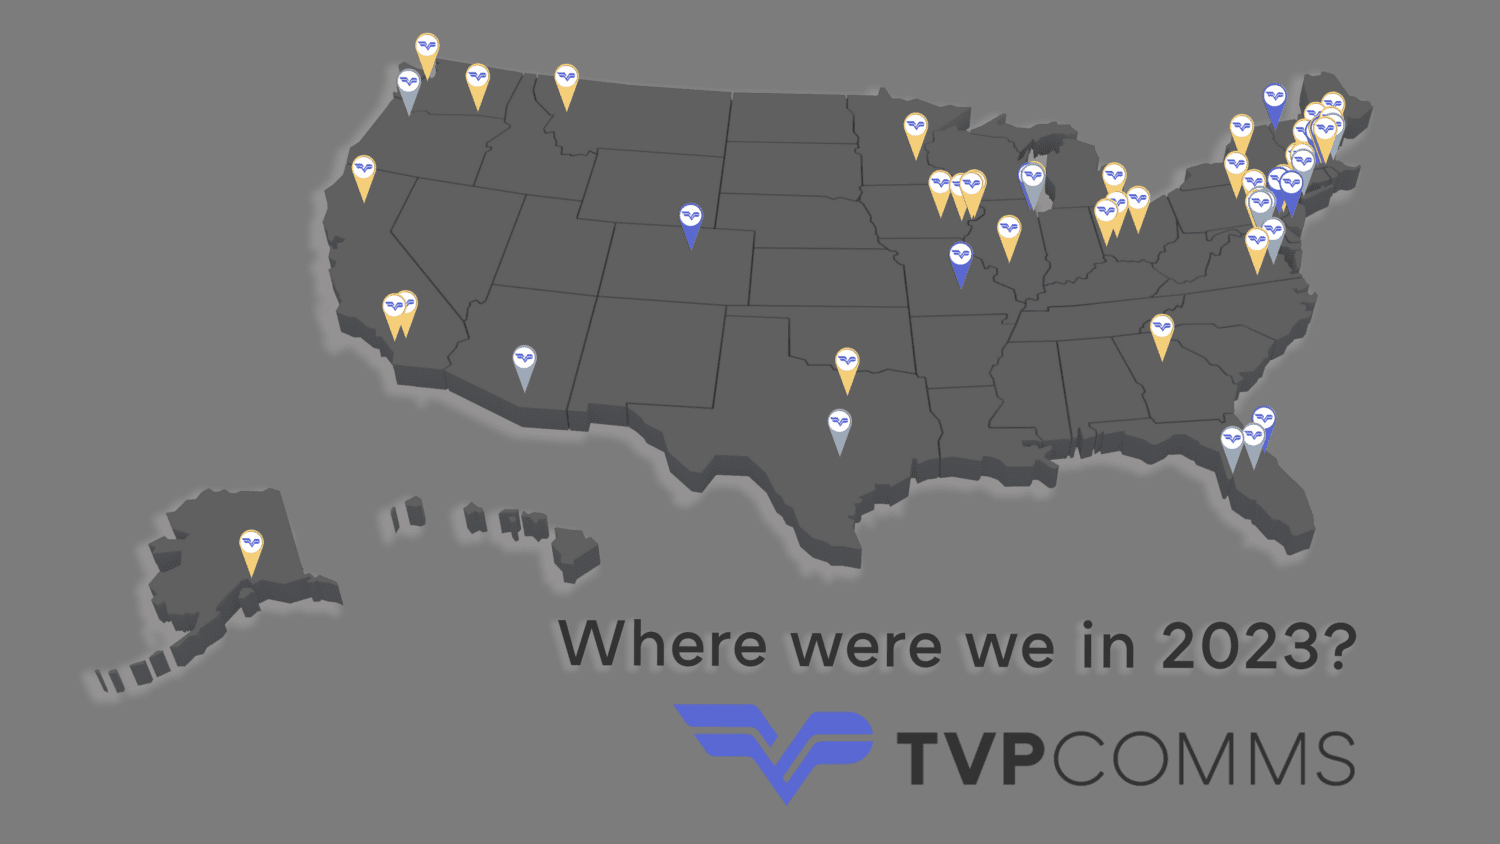 Map of the United States titled "Where were we in 2023?" with pins representing the locations of TVP Comms staff in 2023.